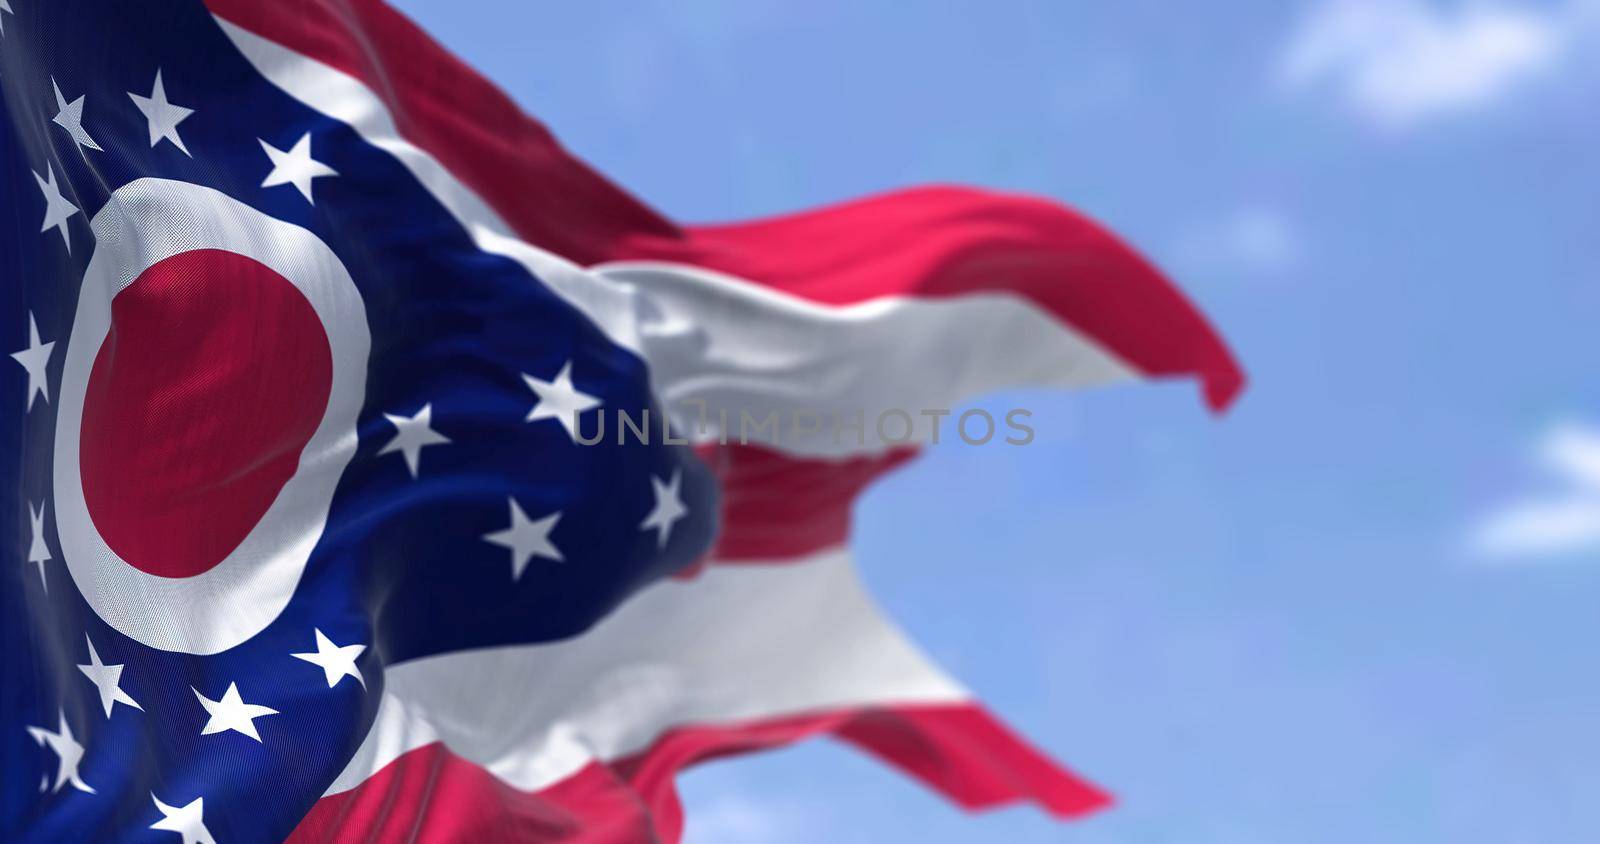 The US state flag of Ohio waving in the wind by rarrarorro